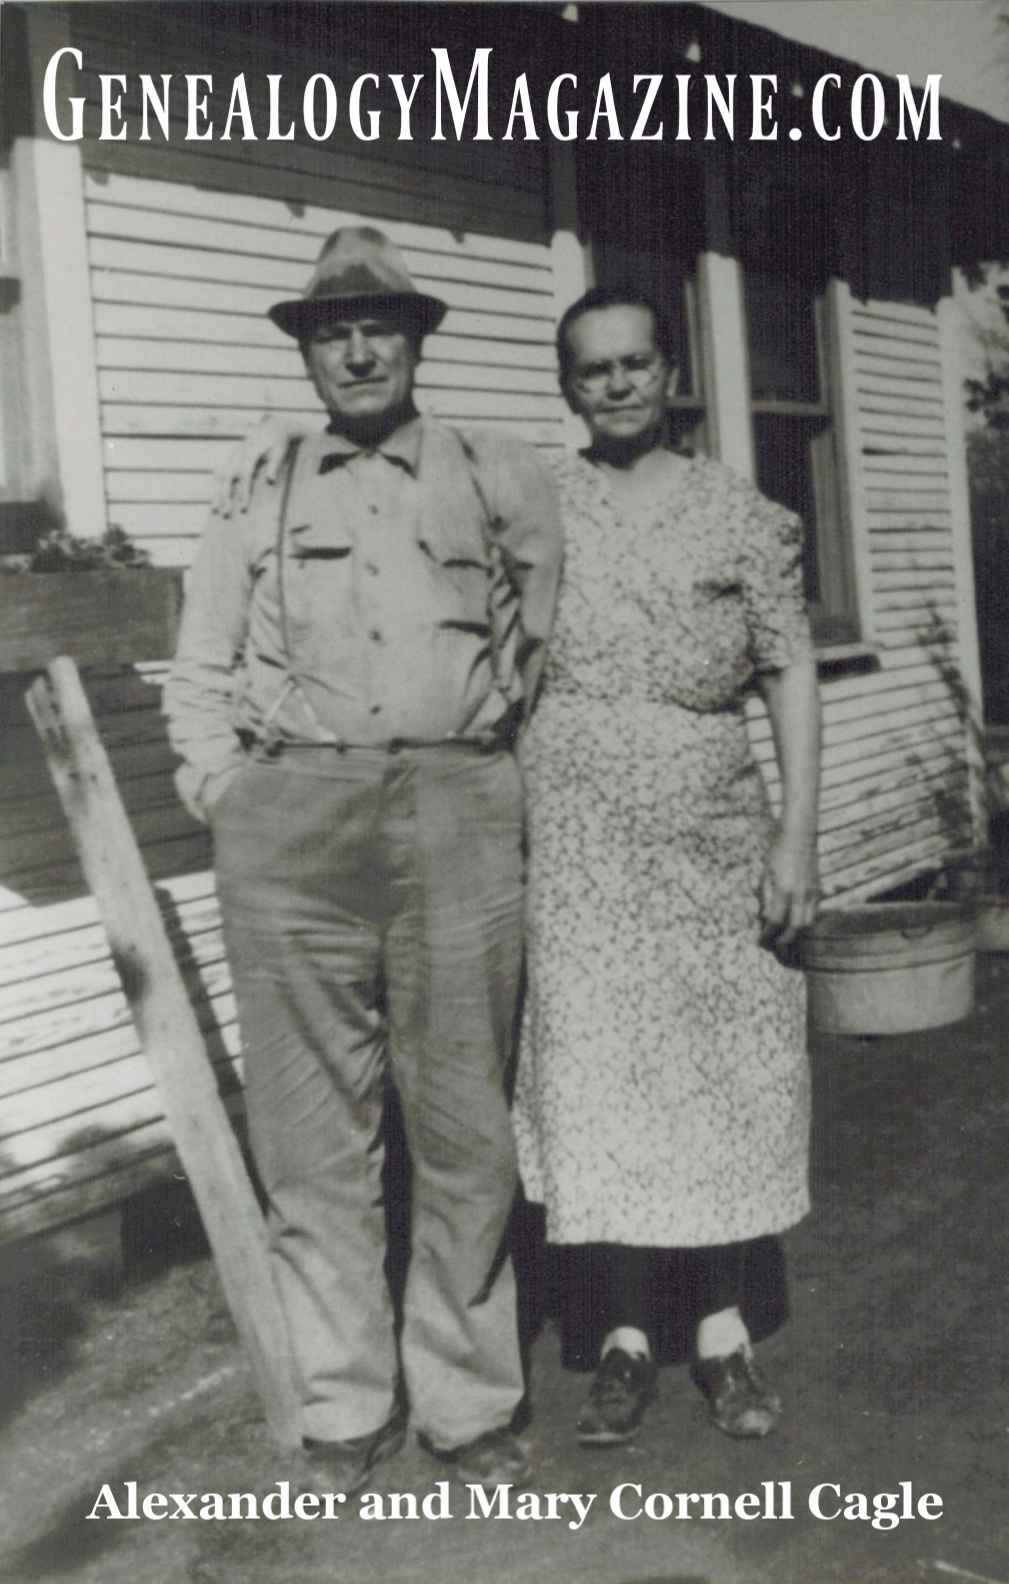 Alexander Cagle and Mary Cornell